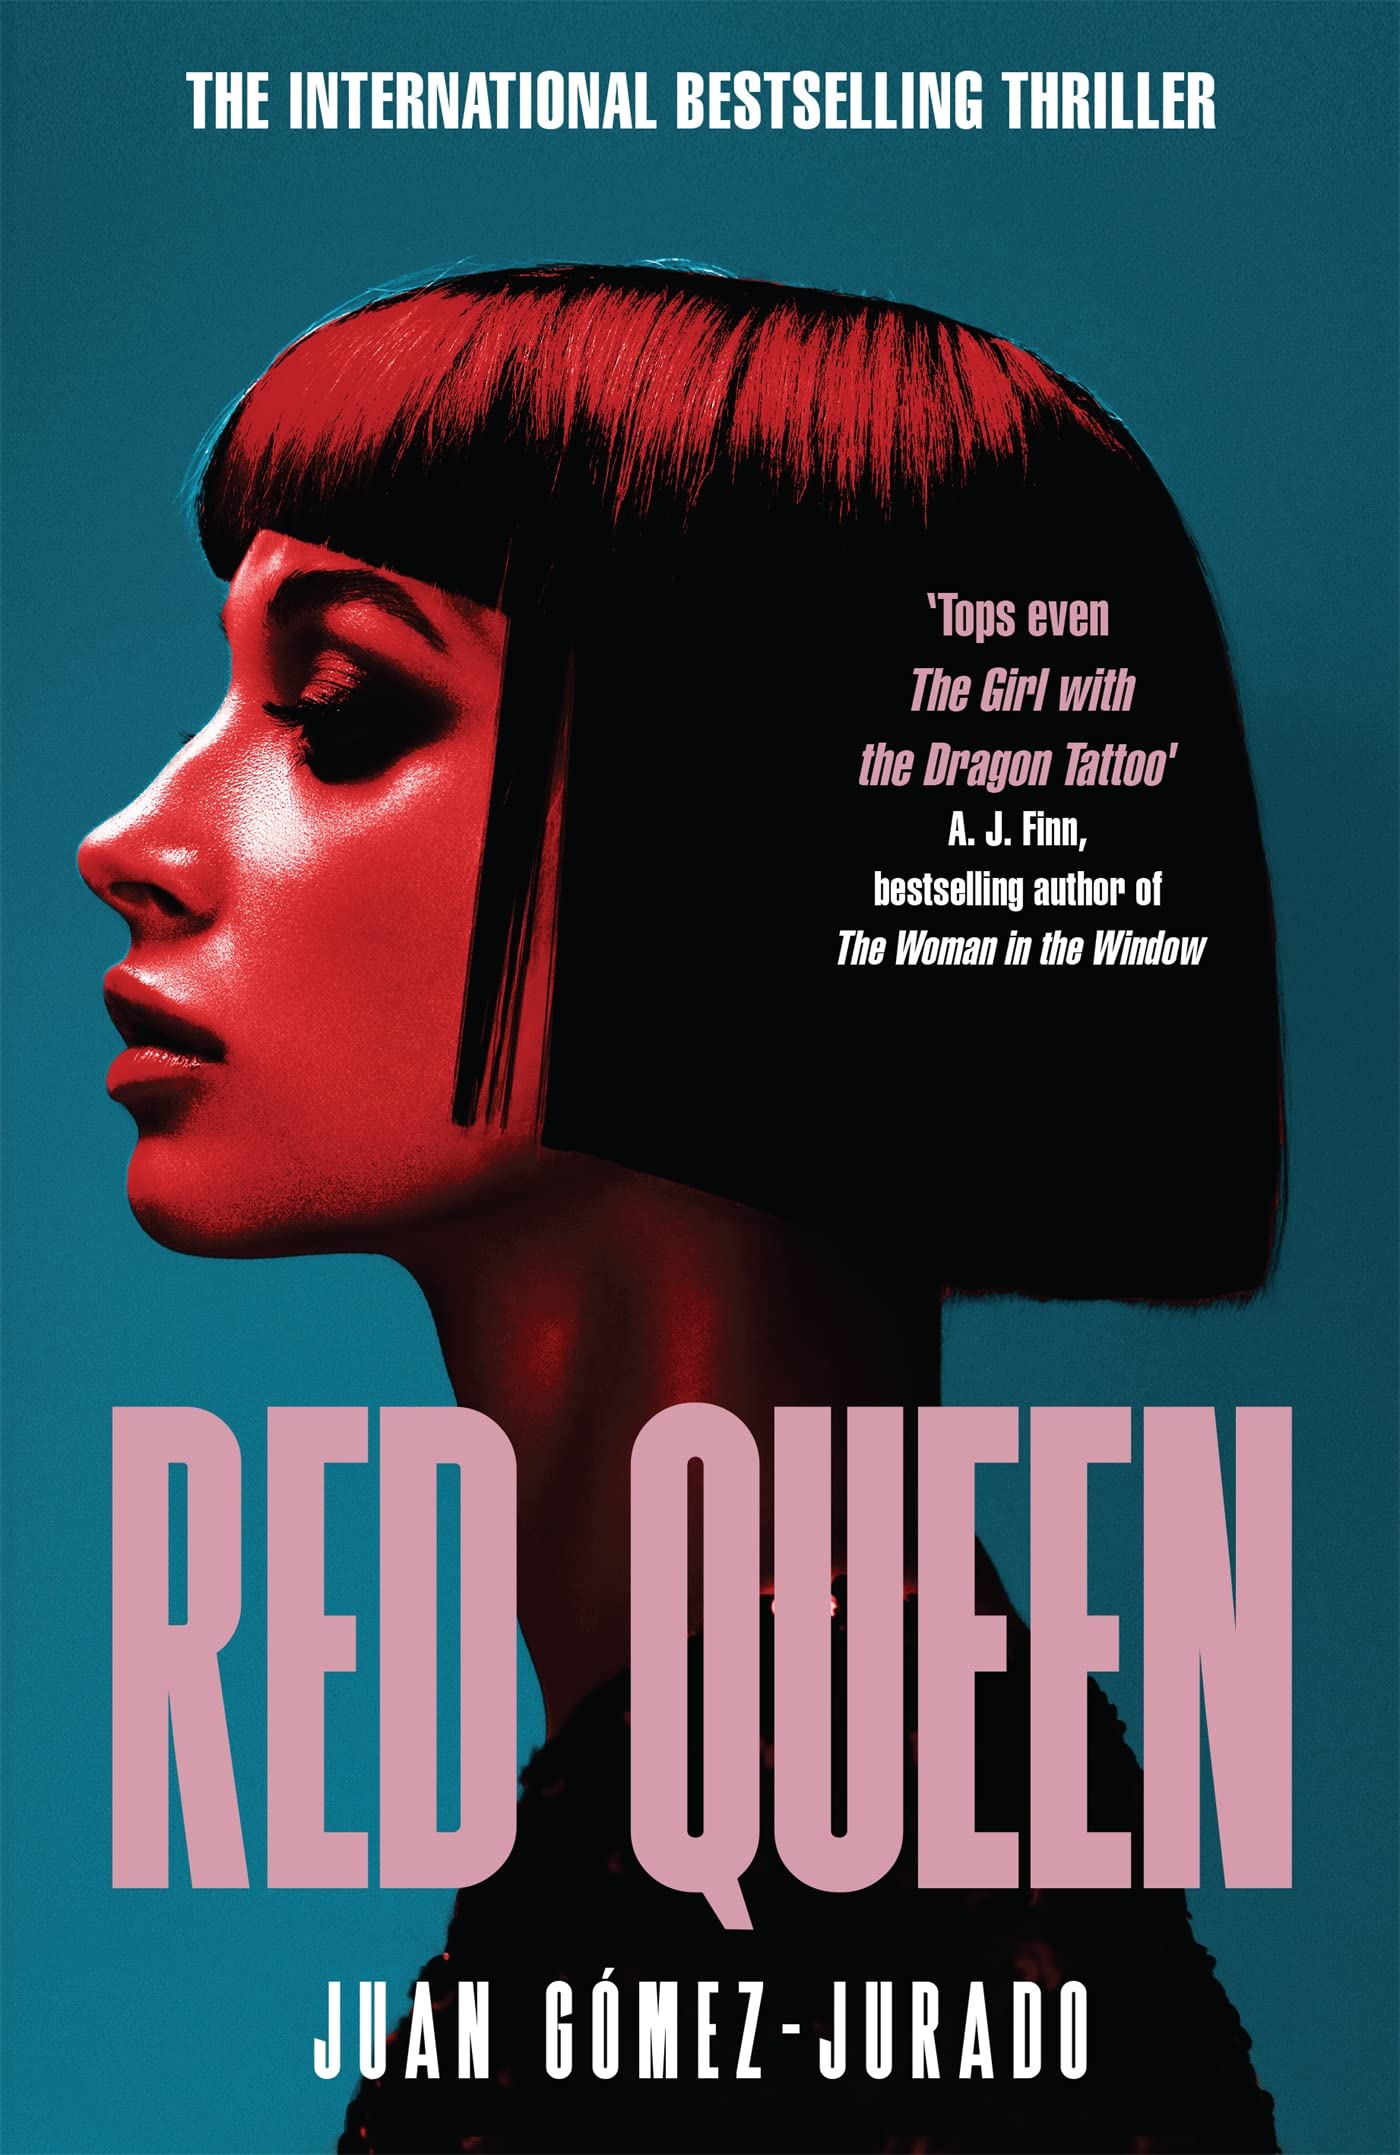 Read a book excerpt from "Red Queen", the internationally bestselling thriller that has taken the world by storm